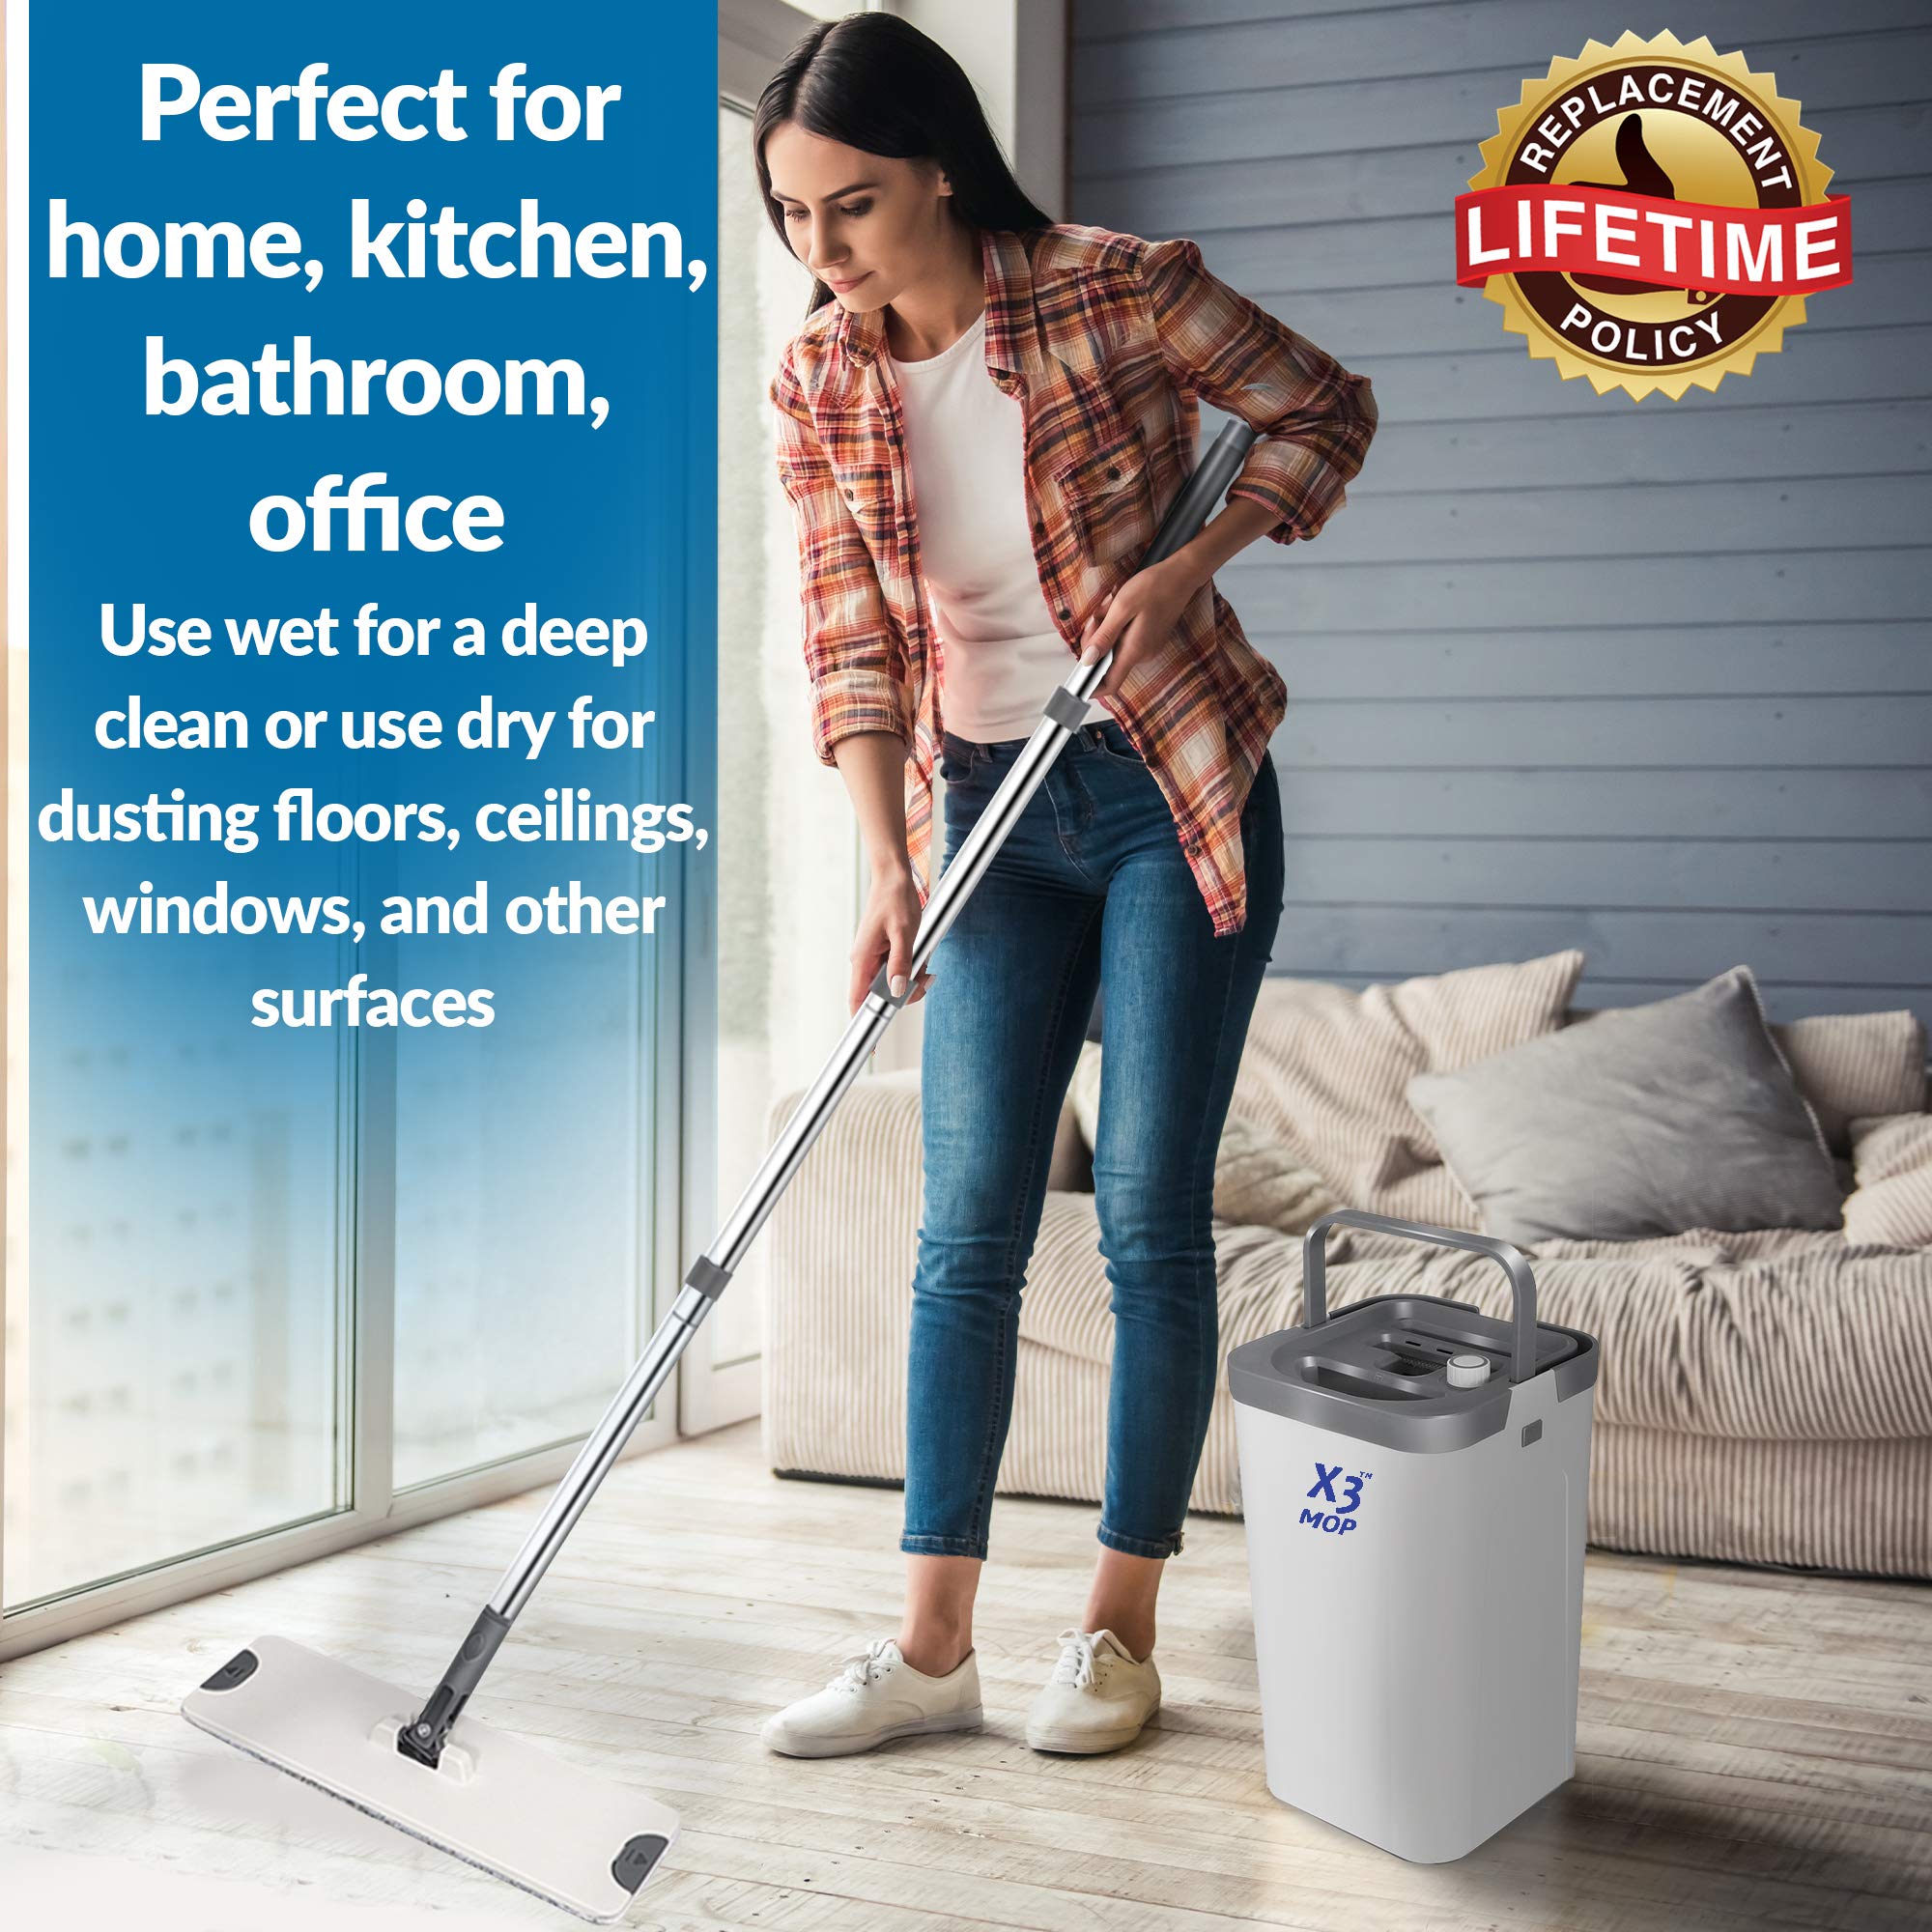 X3 Mop, Separates Dirty and Clean Water, 3-Chamber Design, Flat Mop and Bucket Set, Hands Free Home Floor Cleaning, 3 Reusable Microfiber Mop Pads Included